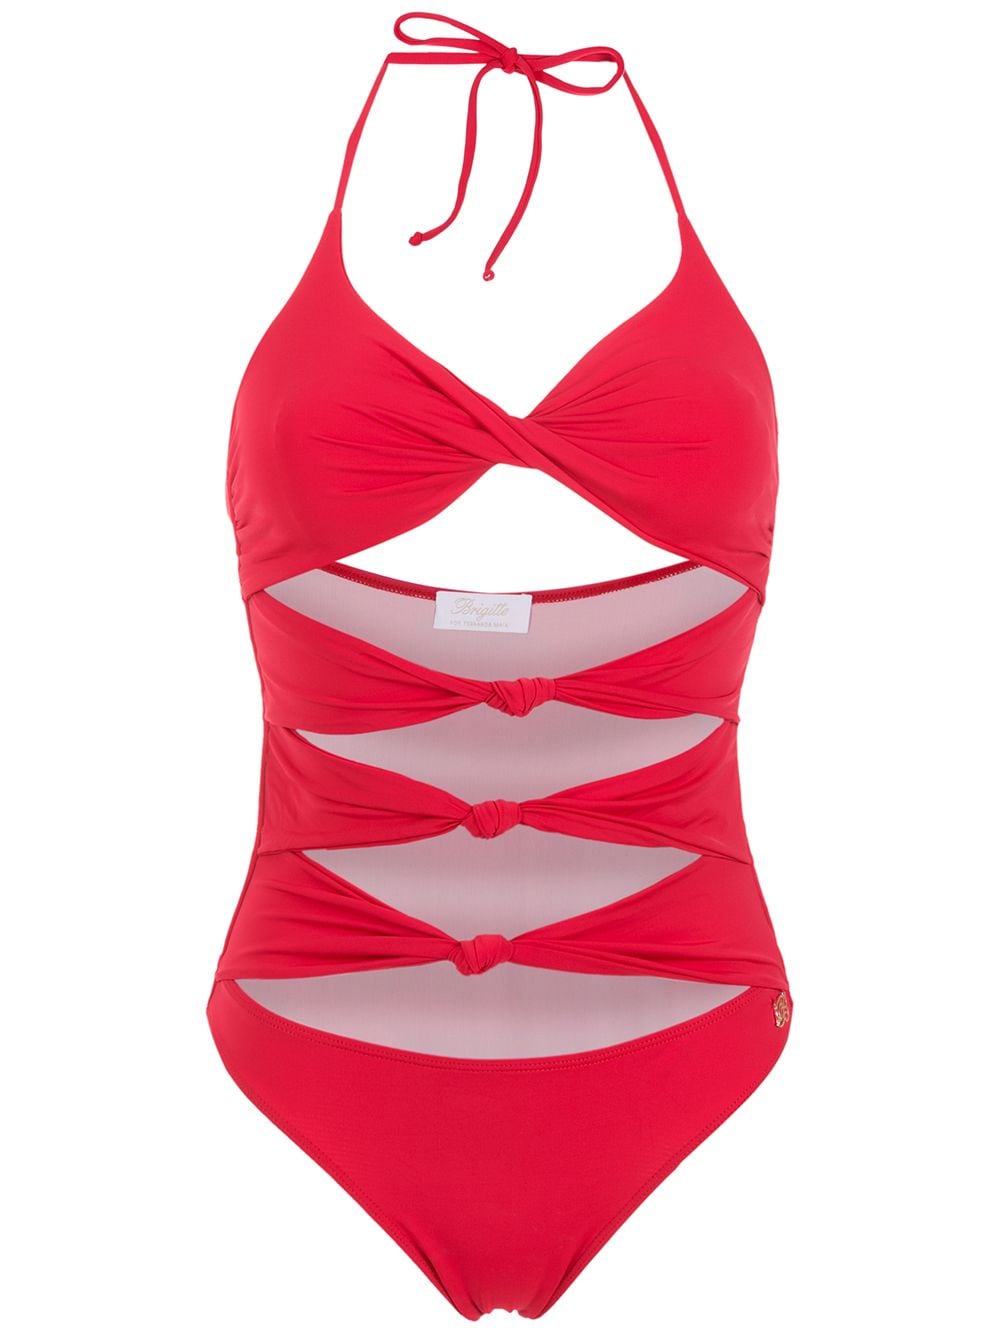 Shop Brigitte Amanda swimsuit with Express Delivery - FARFETCH